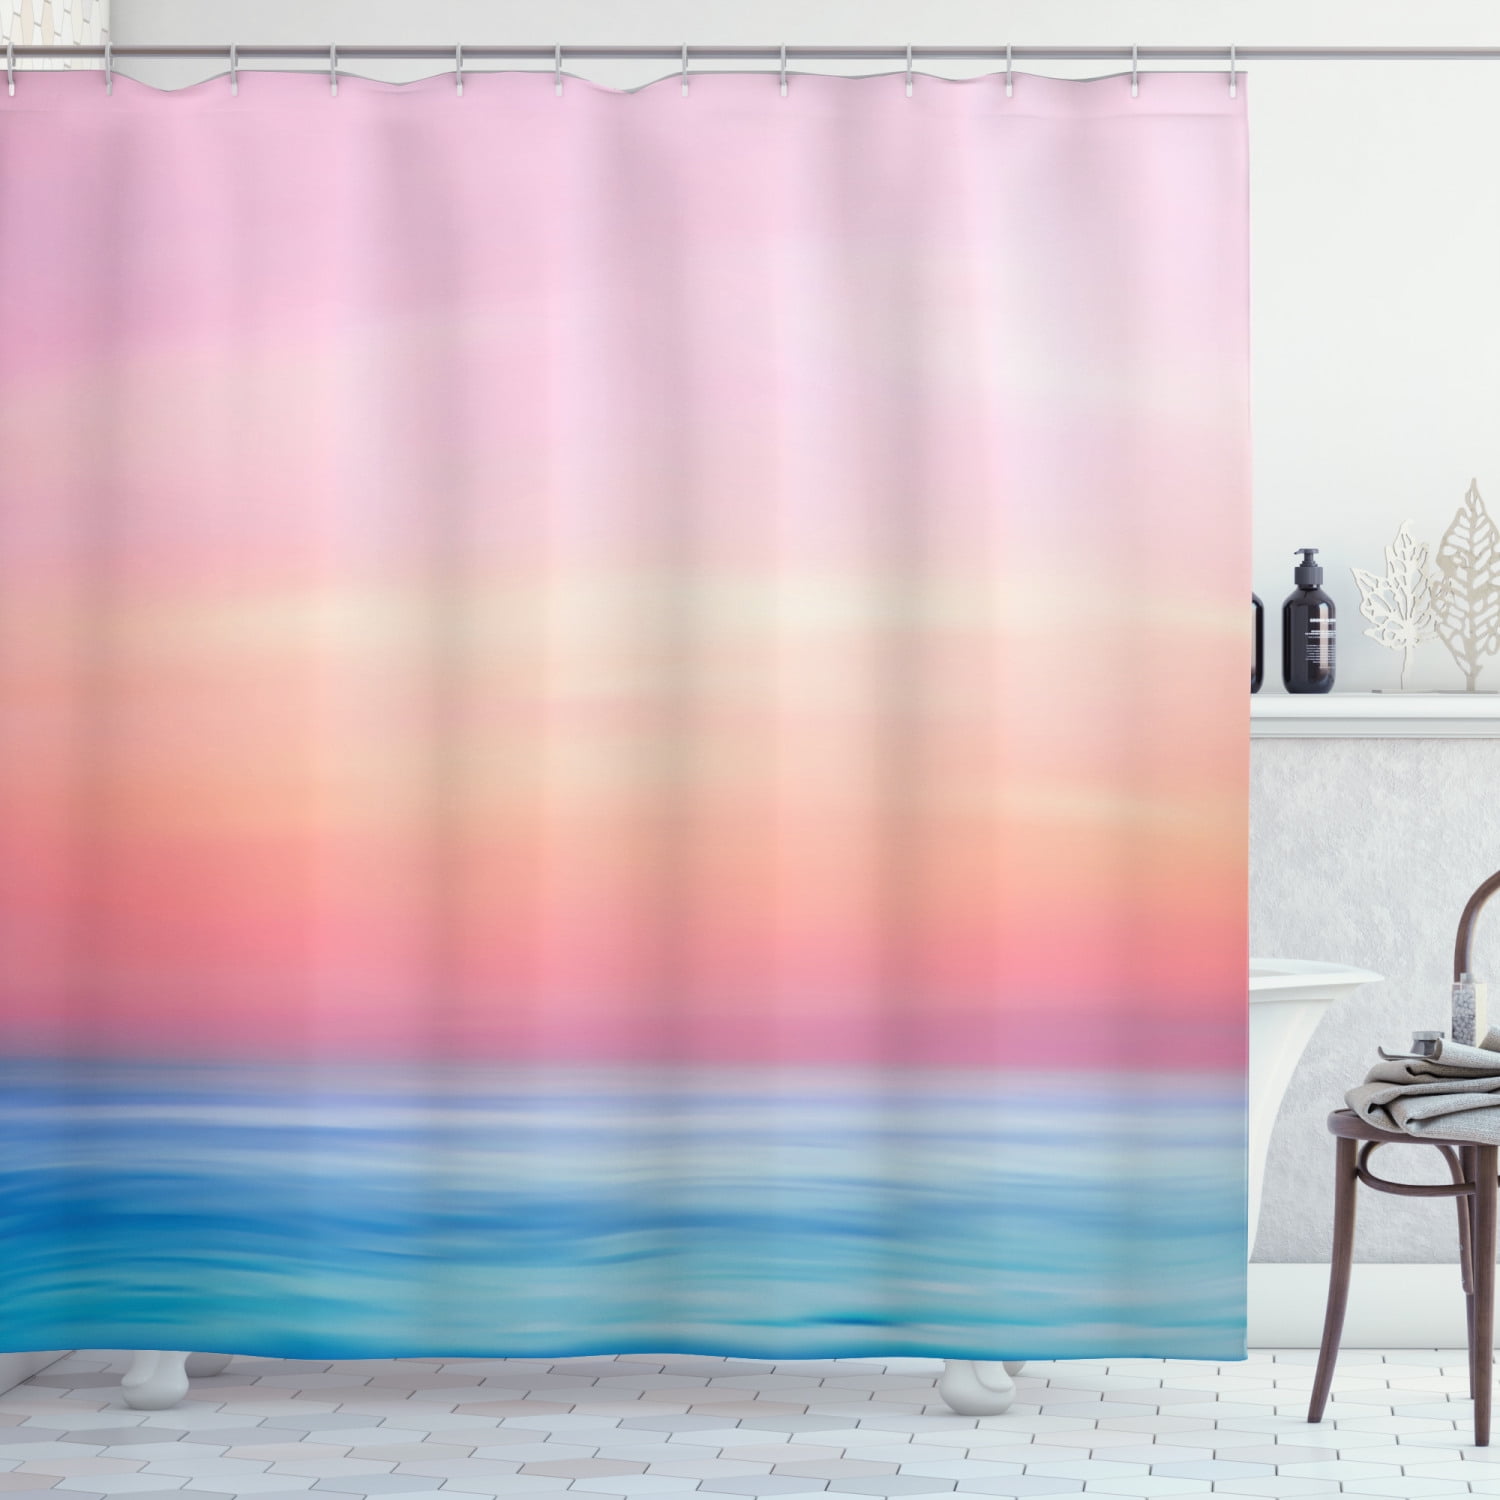 Details about   World Extra Long Art Shower Curtain Waterproof Polyester Fabric Moisture Proof 